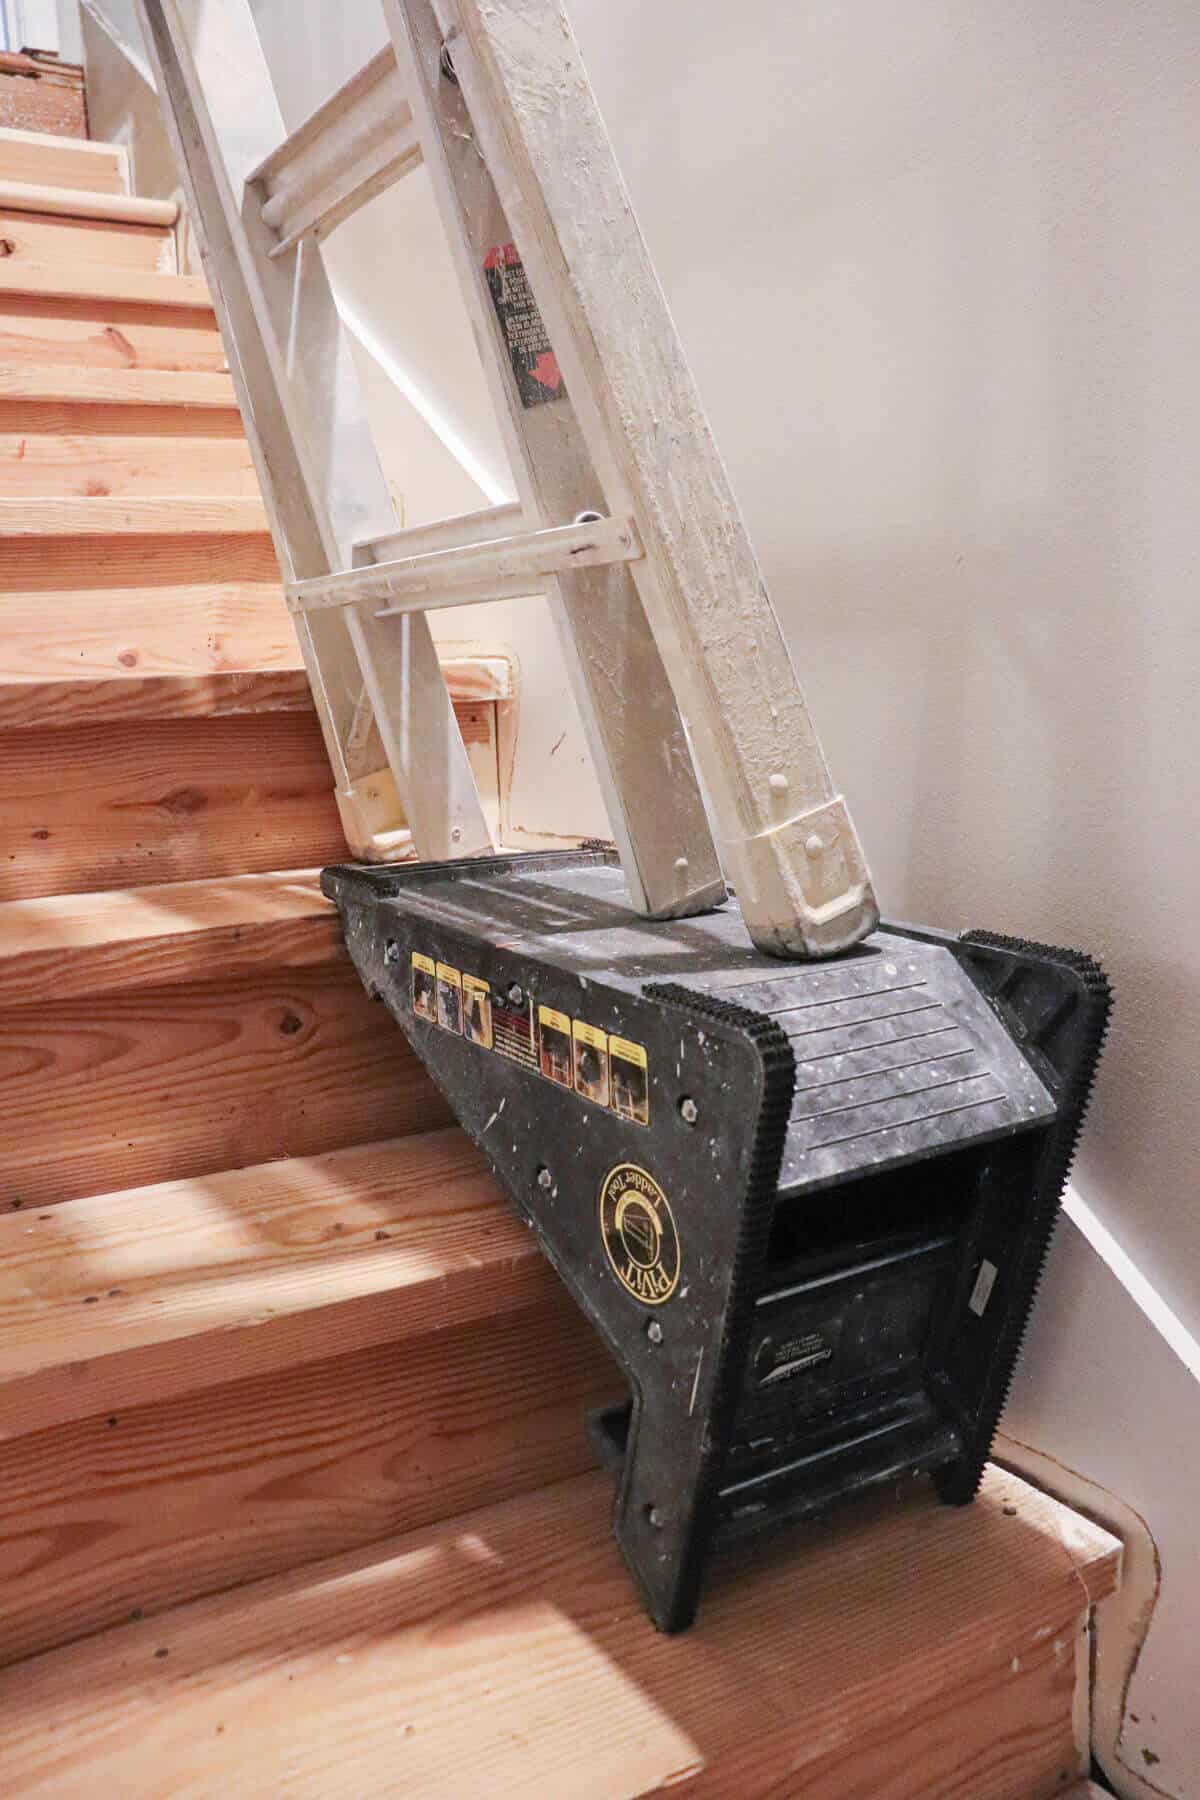 Pivot for Ladder on Stairs